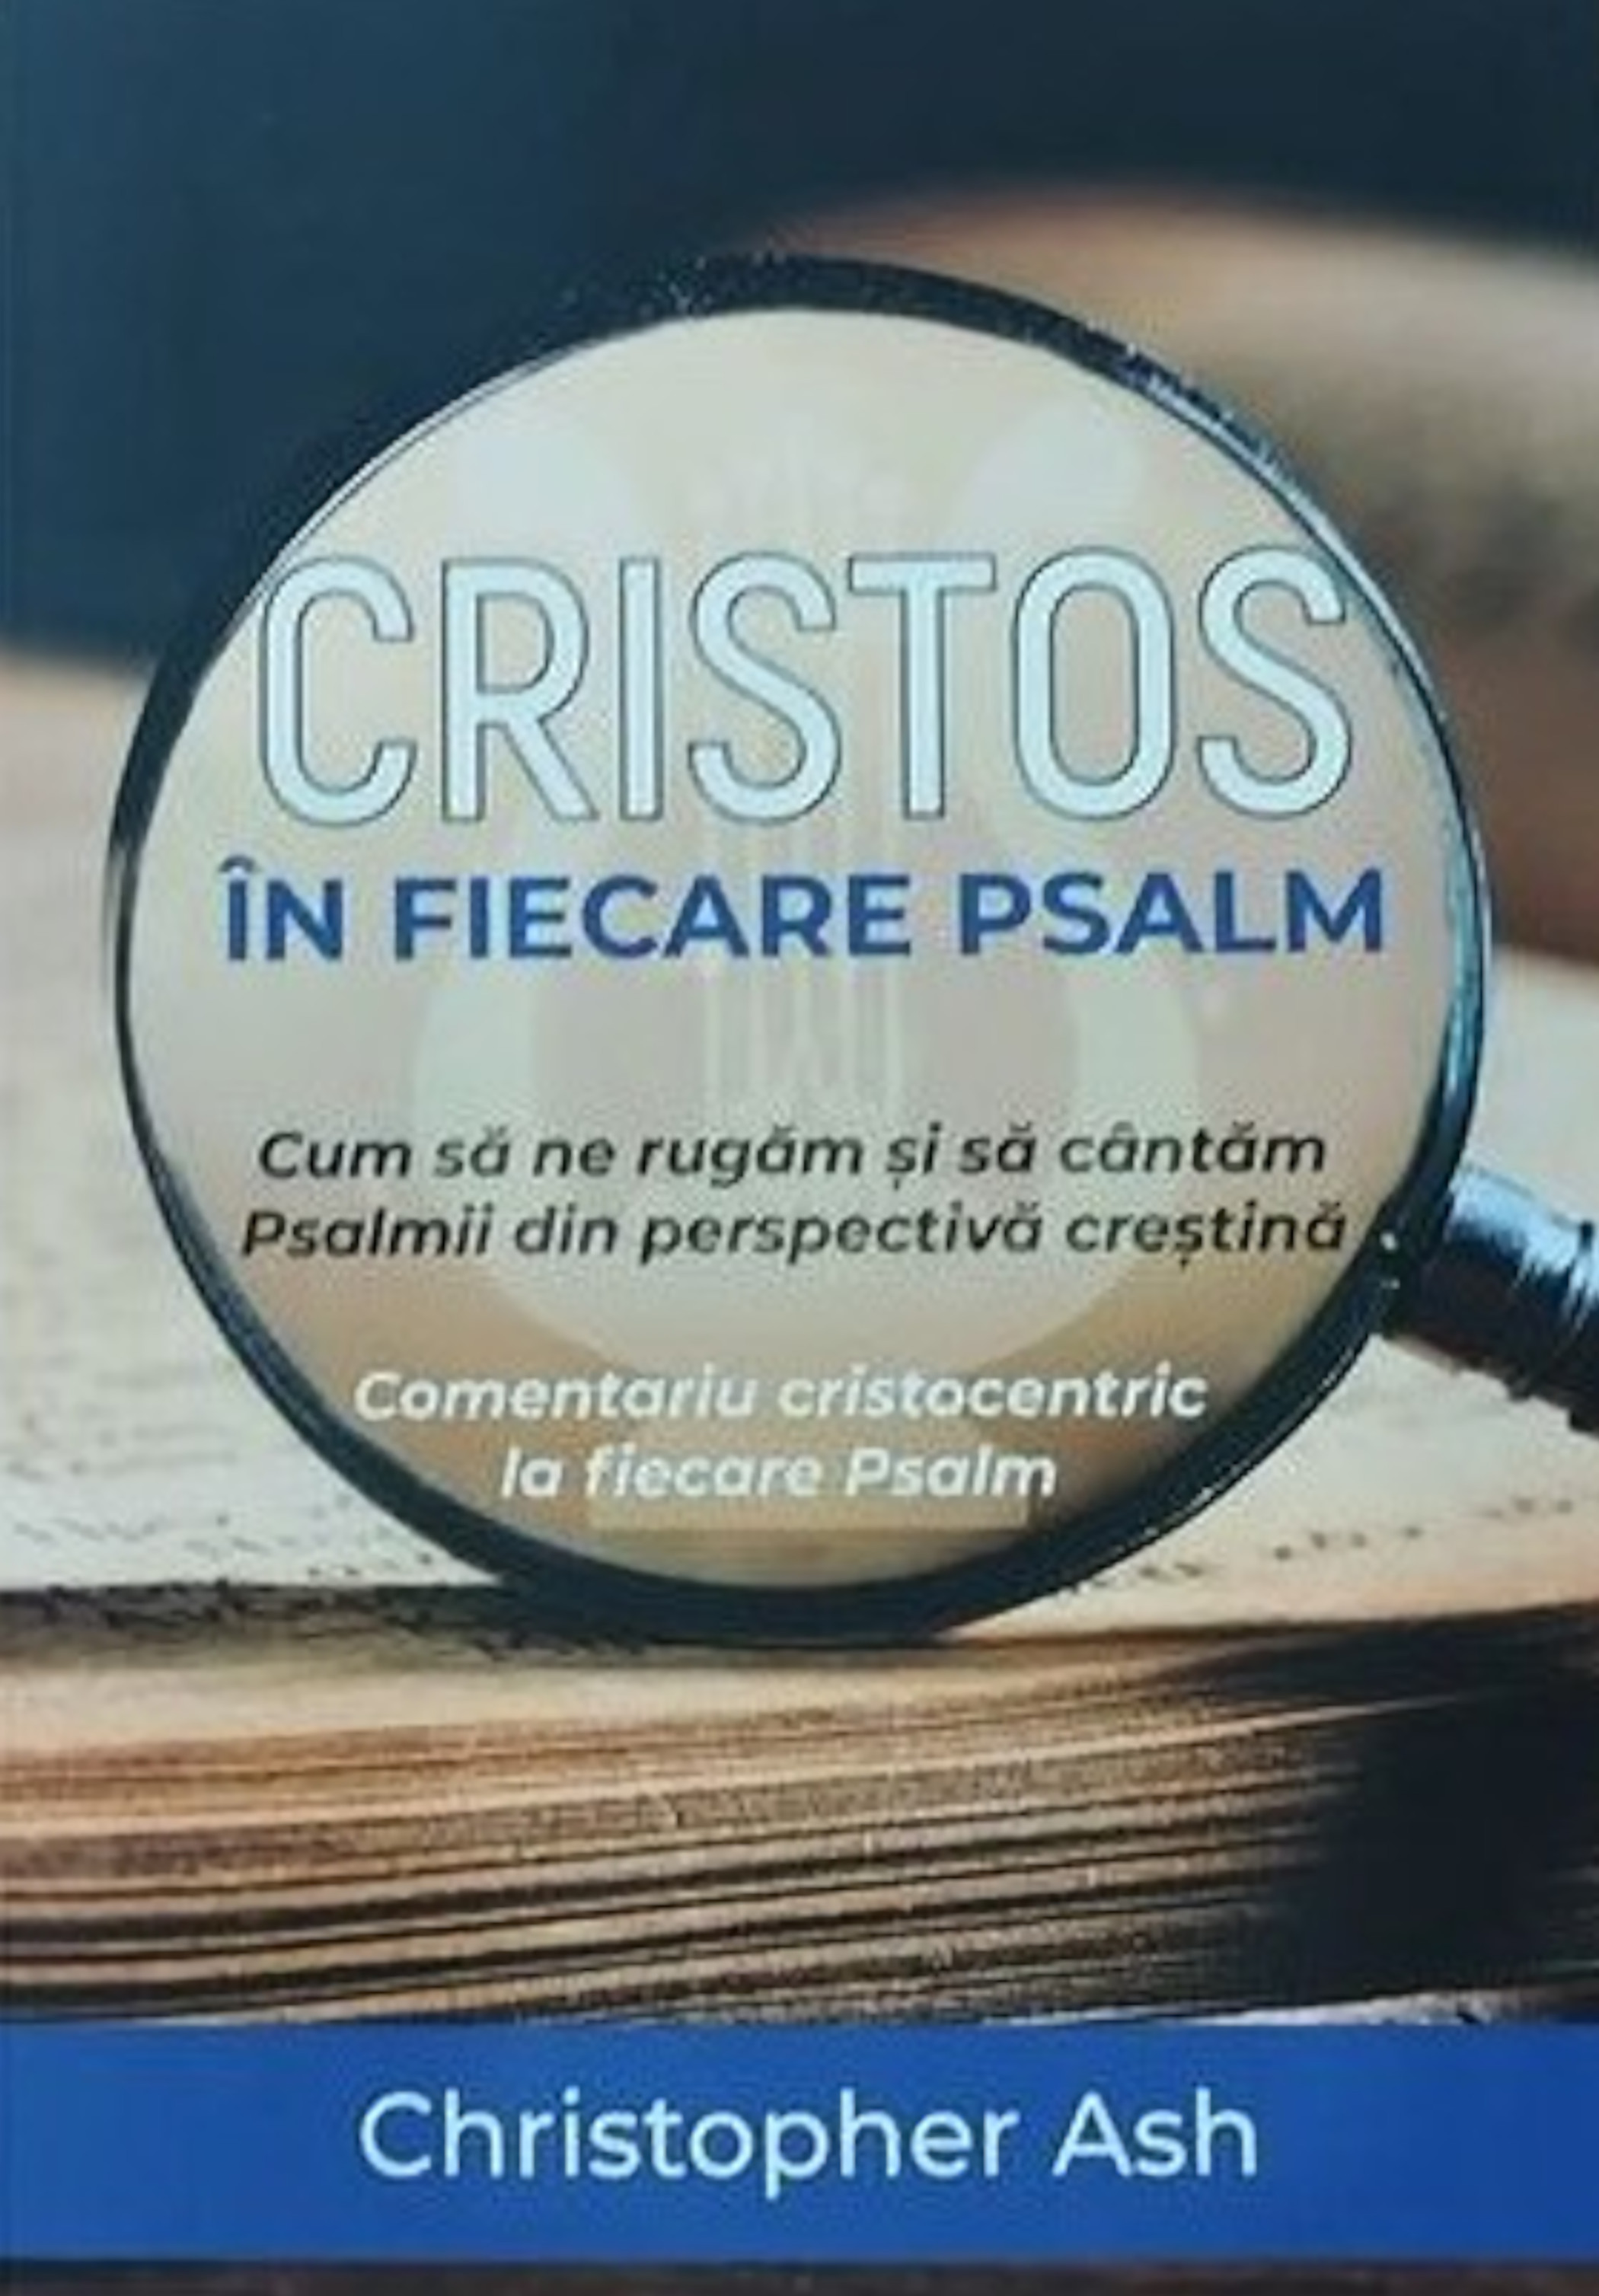 Cristos in fiecare psalm - Christopher Ash